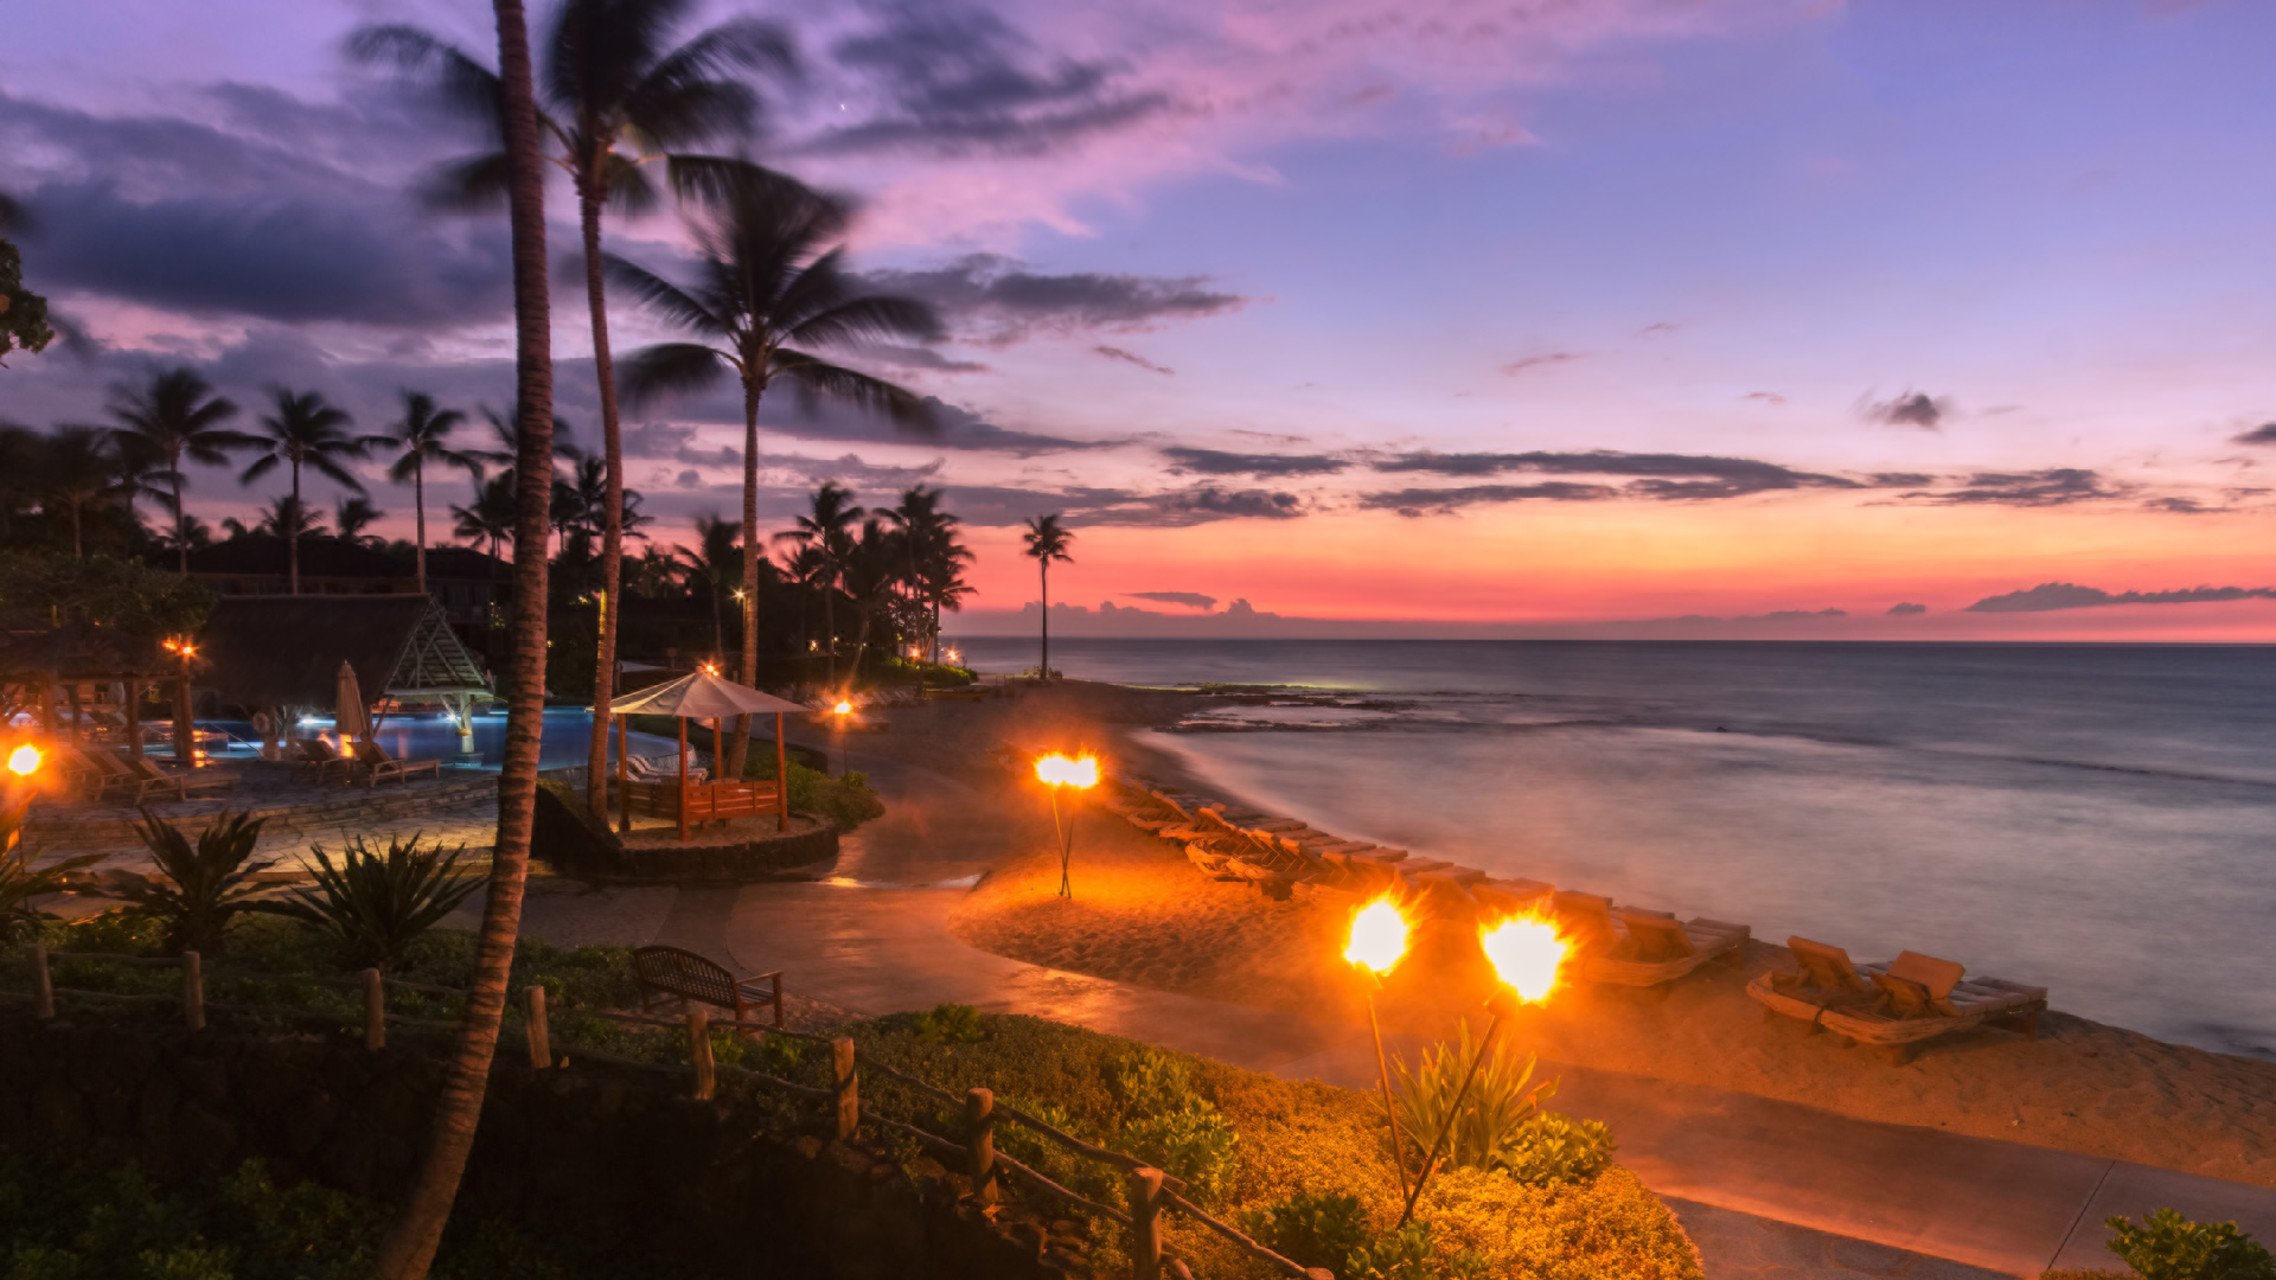  The Four Seasons Resort Hualalai’s multi-million dollar resort-wide renovation includes new amenities, new accommodation options, a new bungalow, reimagined guest rooms and suites with updated technology, access to the new Kumu Kai Marine Center adj